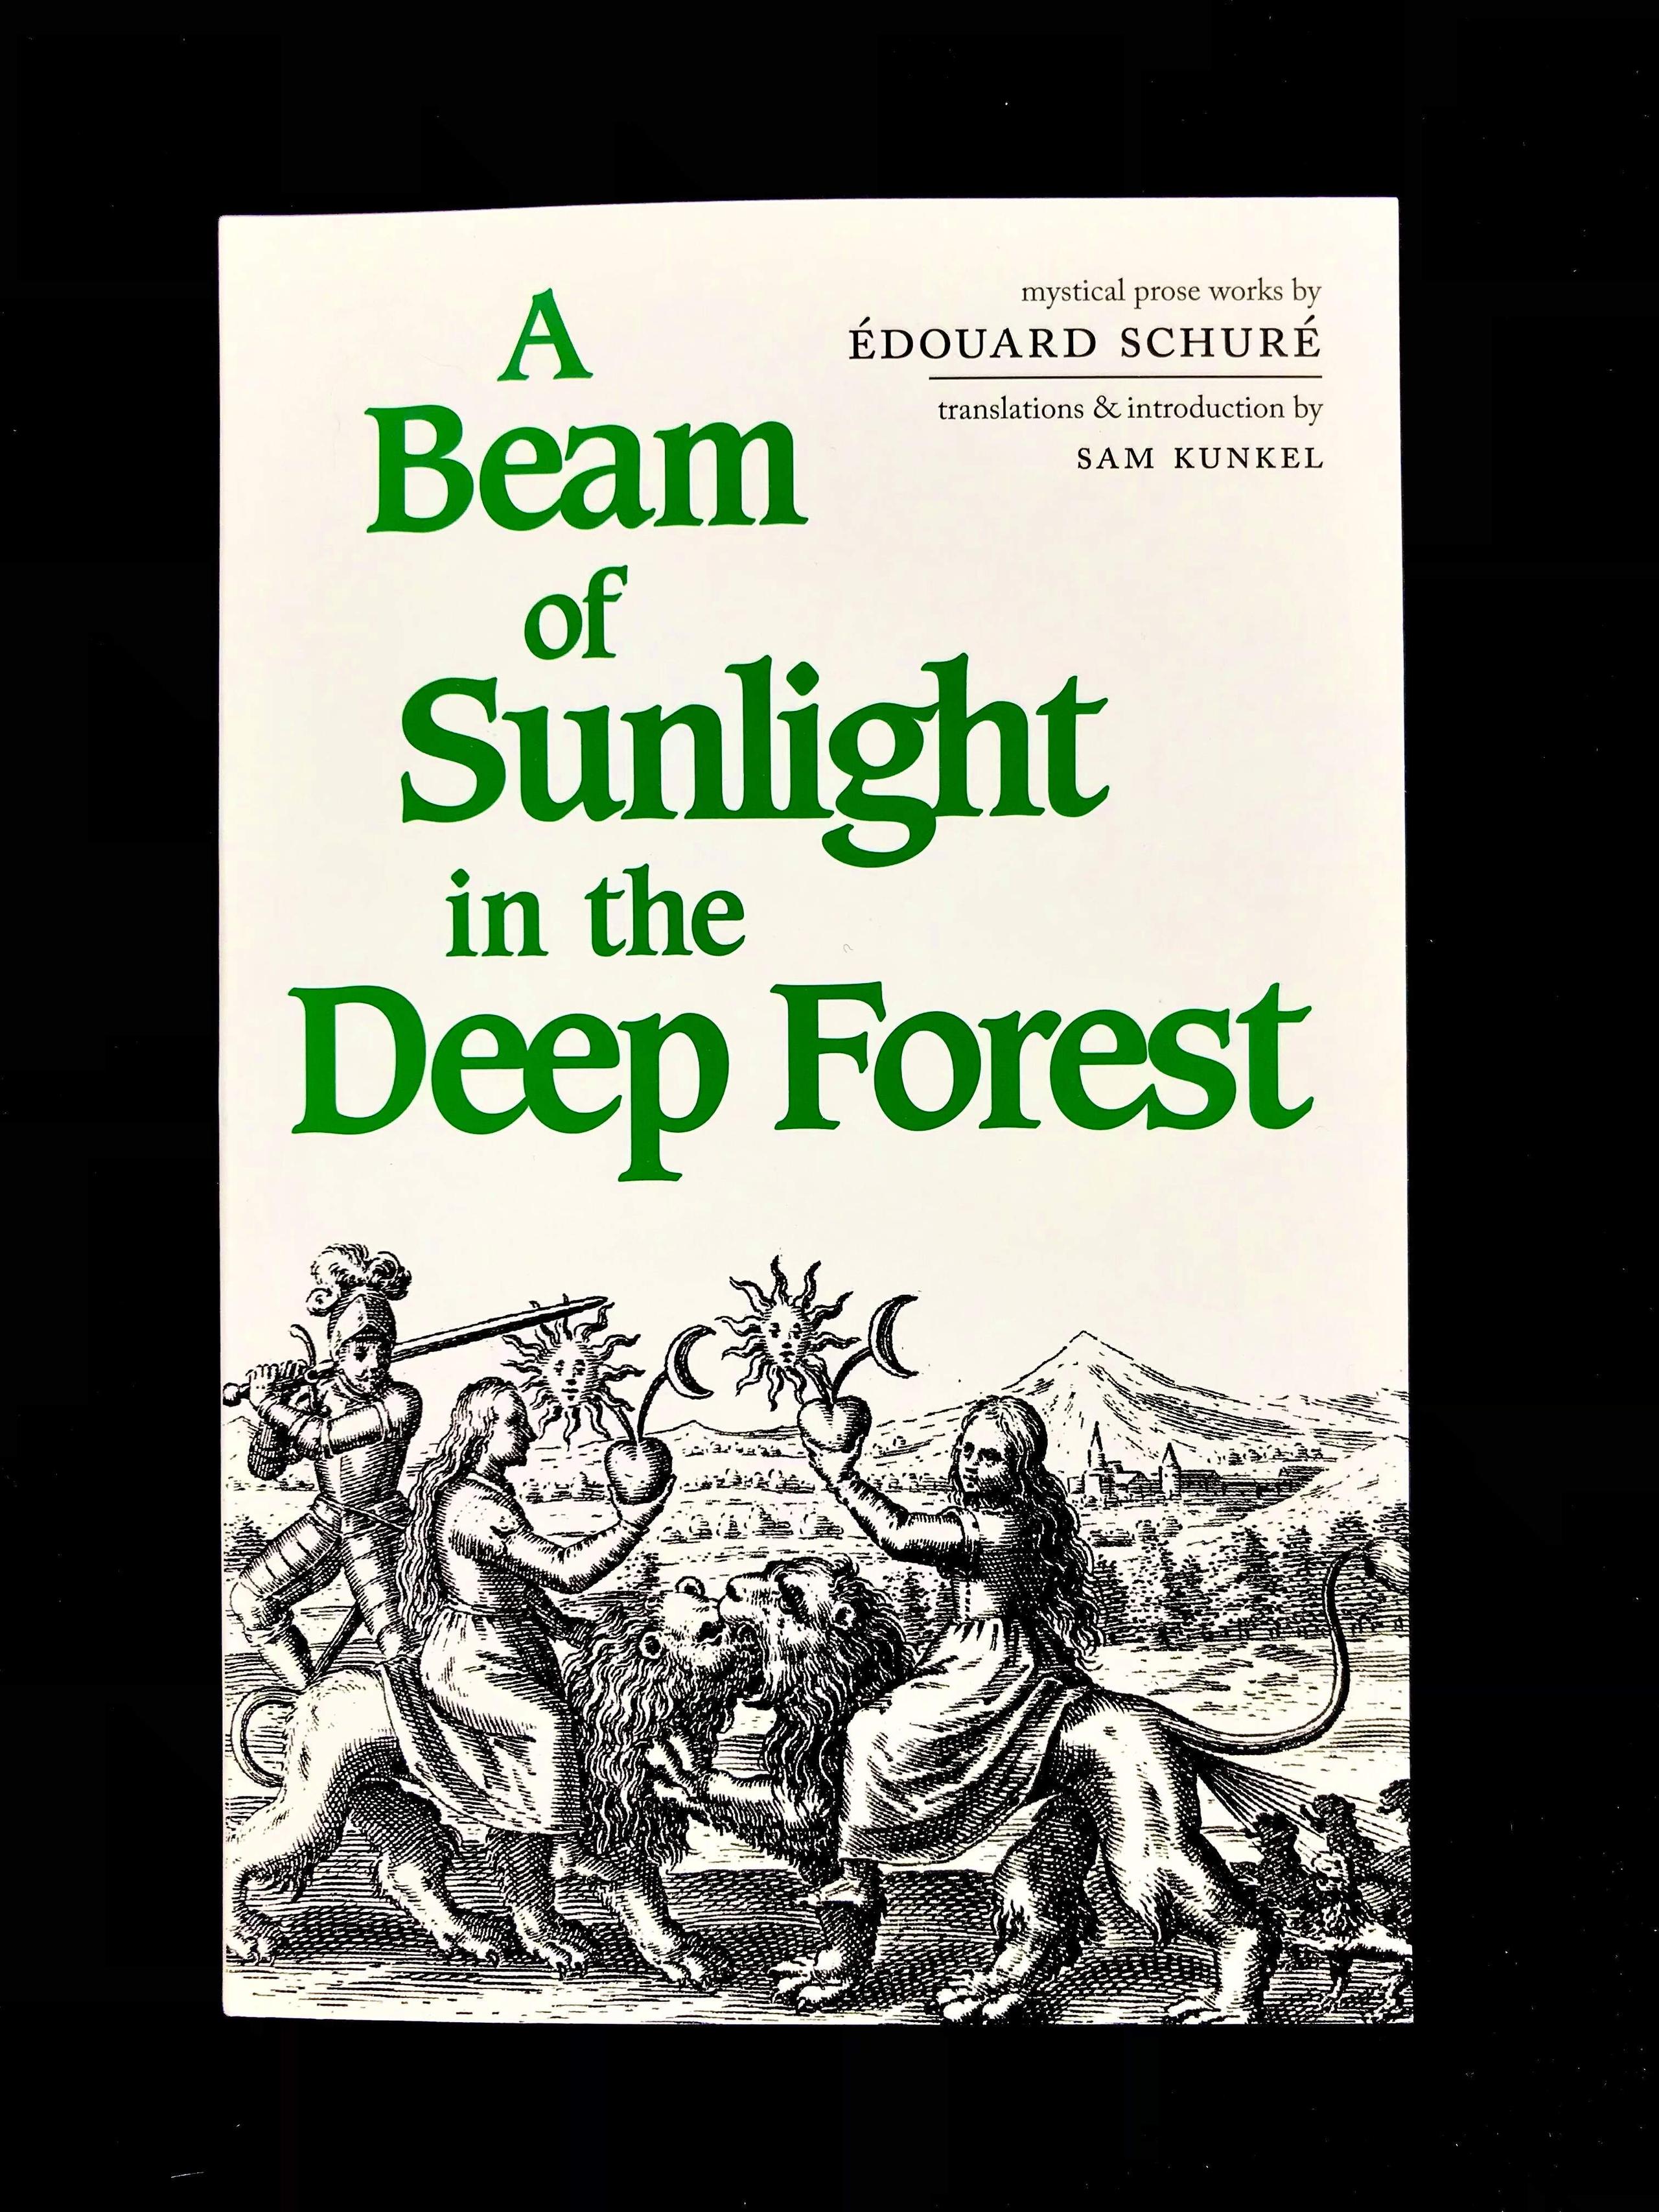 A Beam of Sunlight in the Deep Forest: Mystical Prose Works by Édouard Schuré